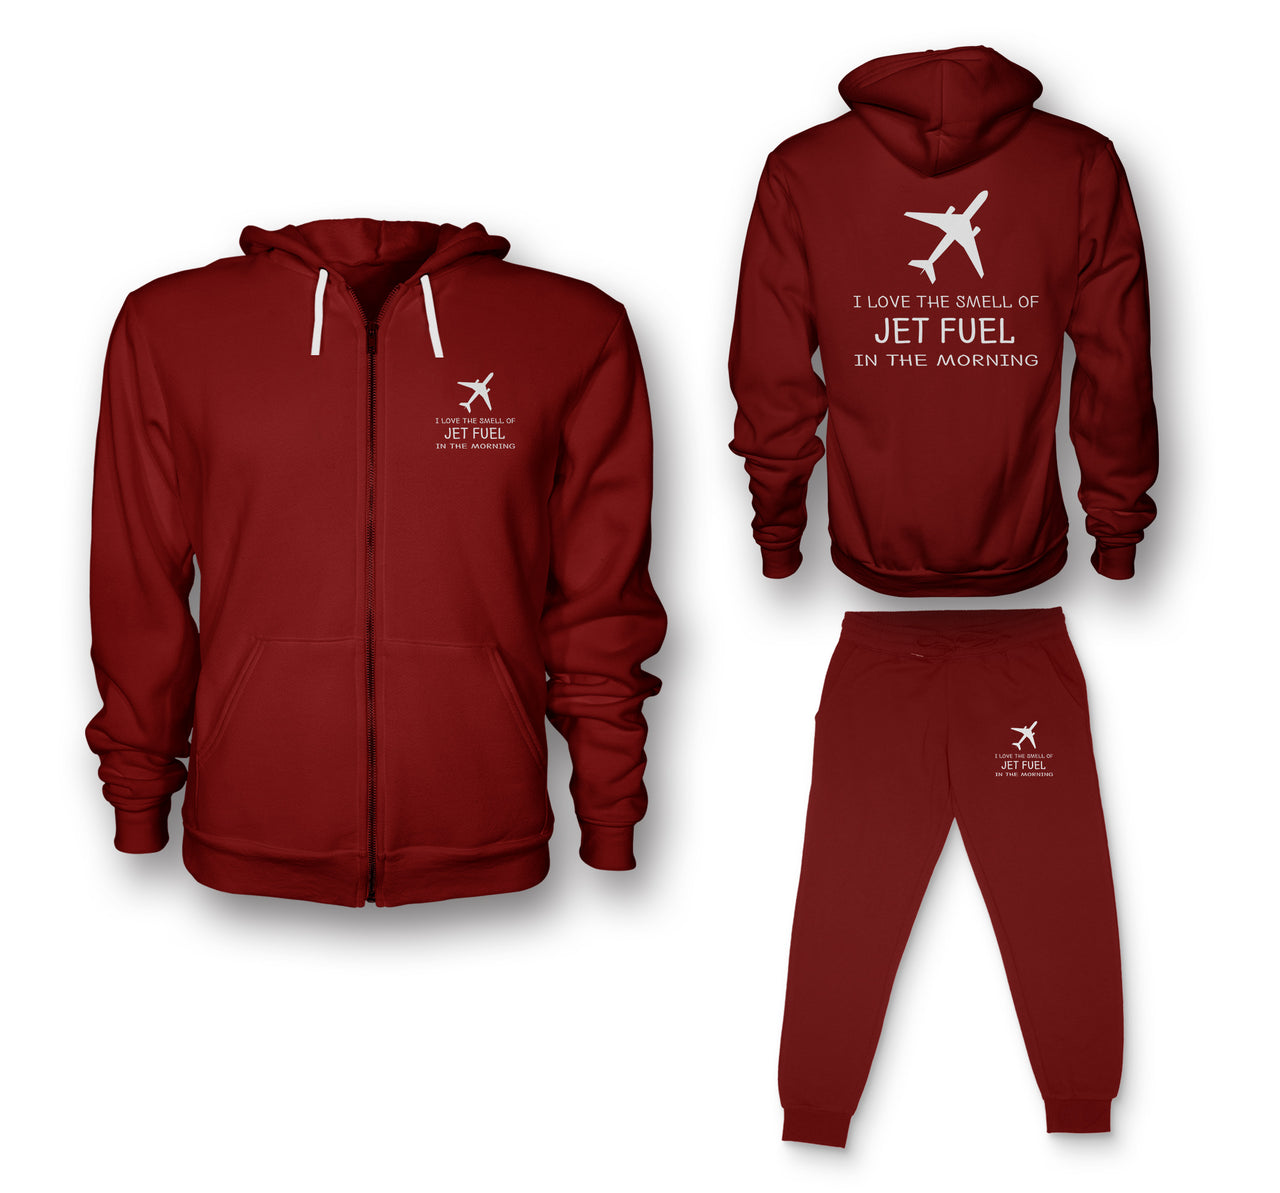 I Love The Smell Of Jet Fuel In The Morning Designed Zipped Hoodies & Sweatpants Set